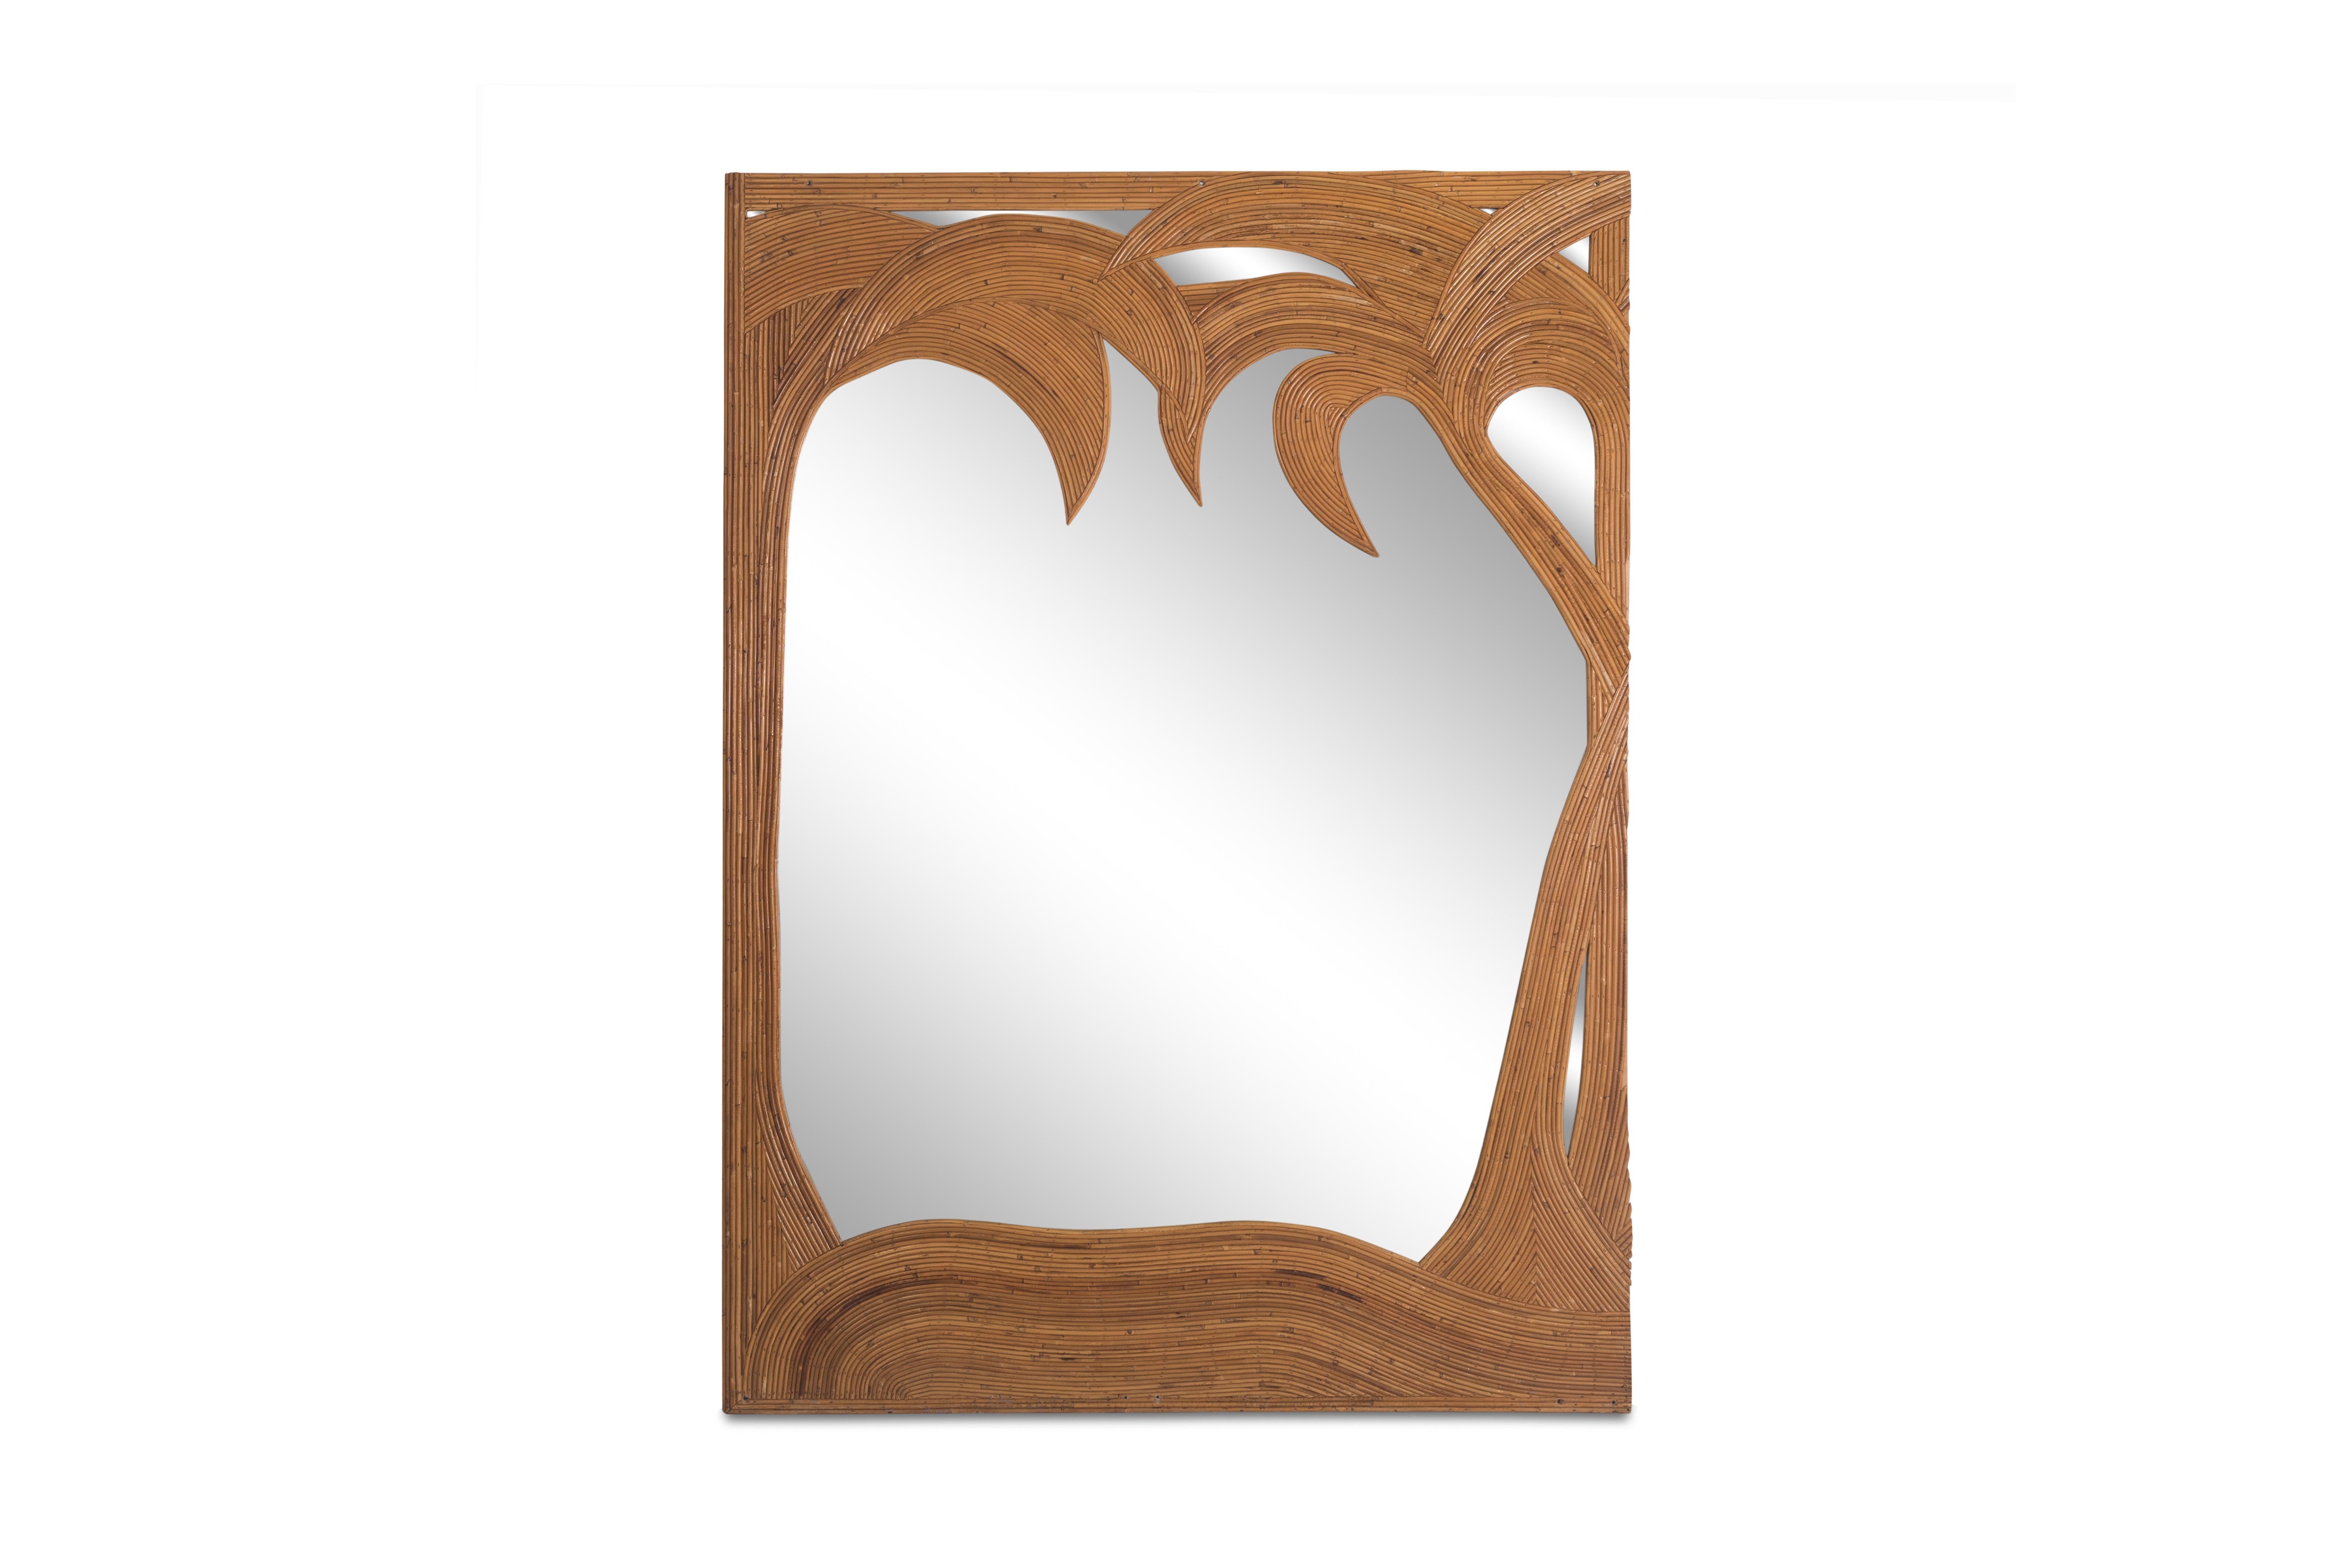 Bamboo mirrored panels by Vivai del Sud. showing a tropical pattern of palmtrees, cladded in bamboo, giving these items a very warm appearance. The mirrors can either be hanged on the wall or be placed on the floor.

Italy - 1970's